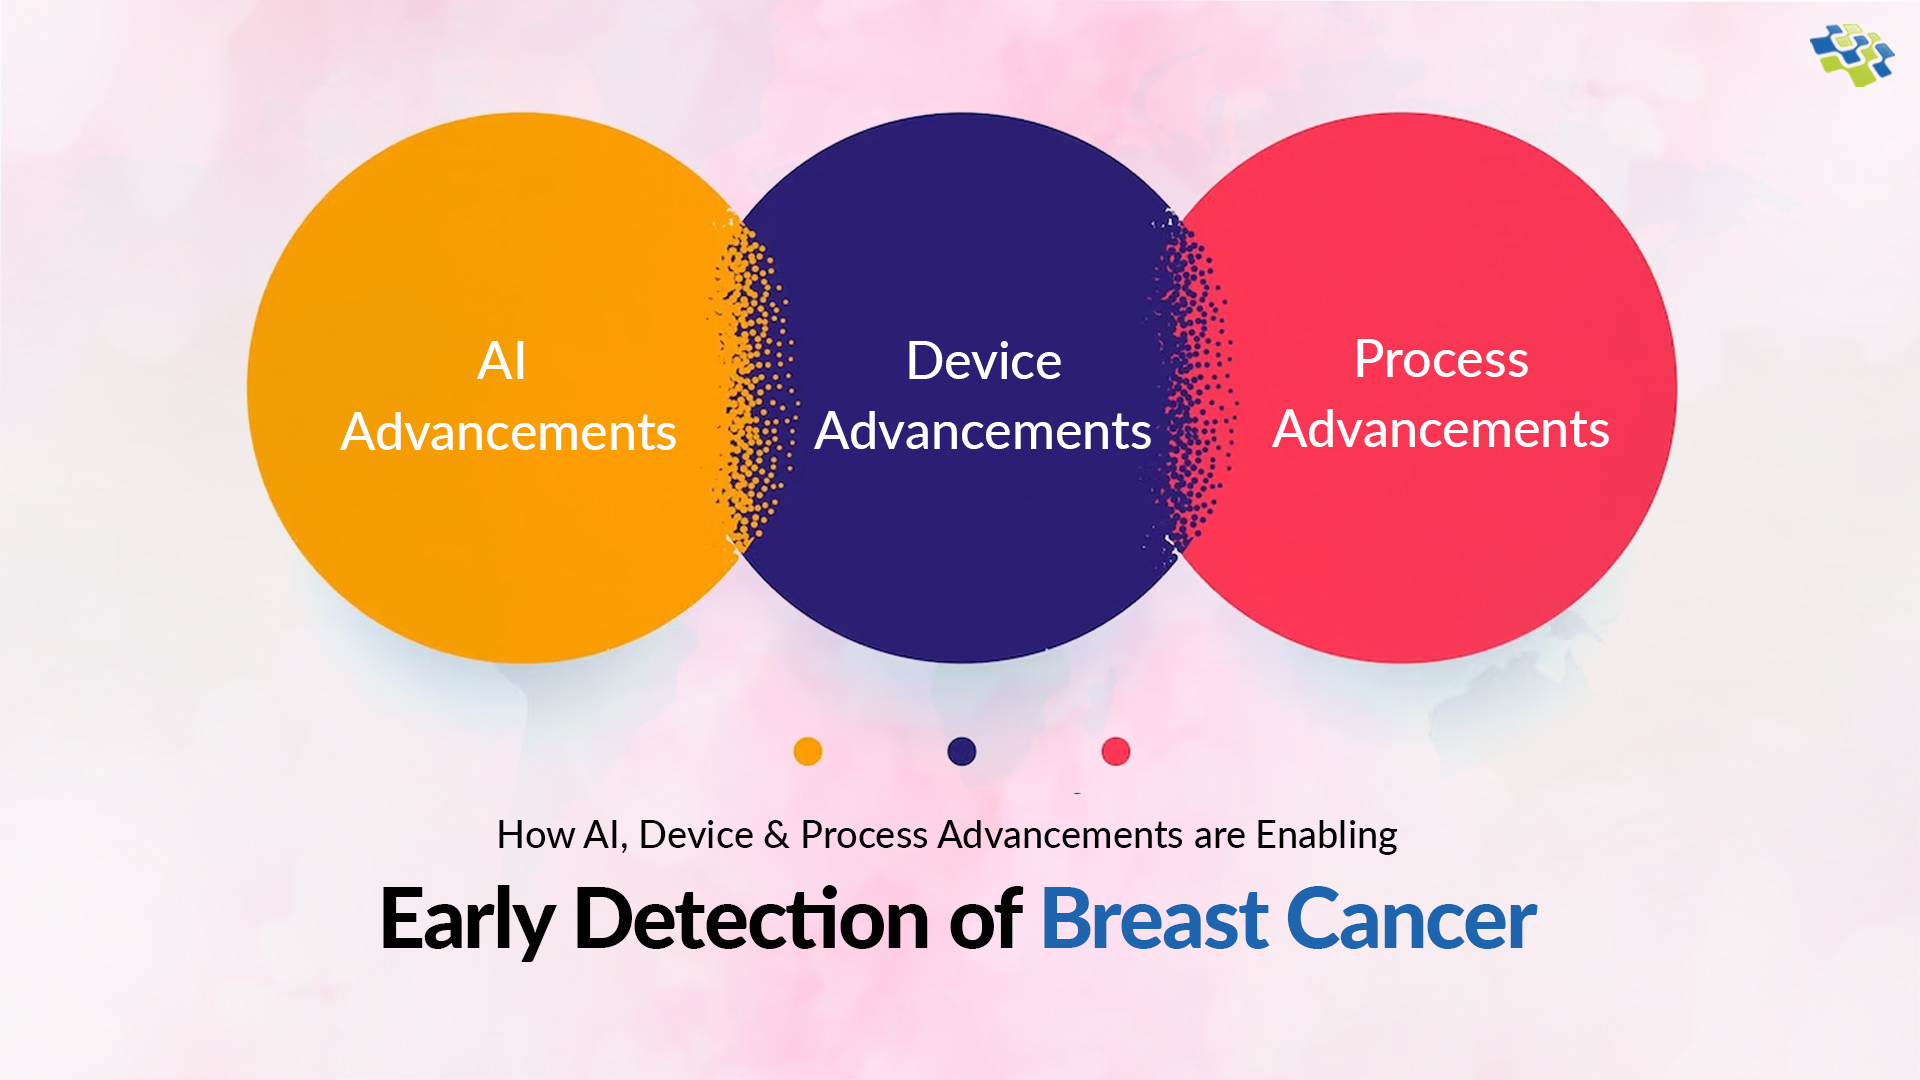 Early Detection of Breast Cancer: AI Advancement